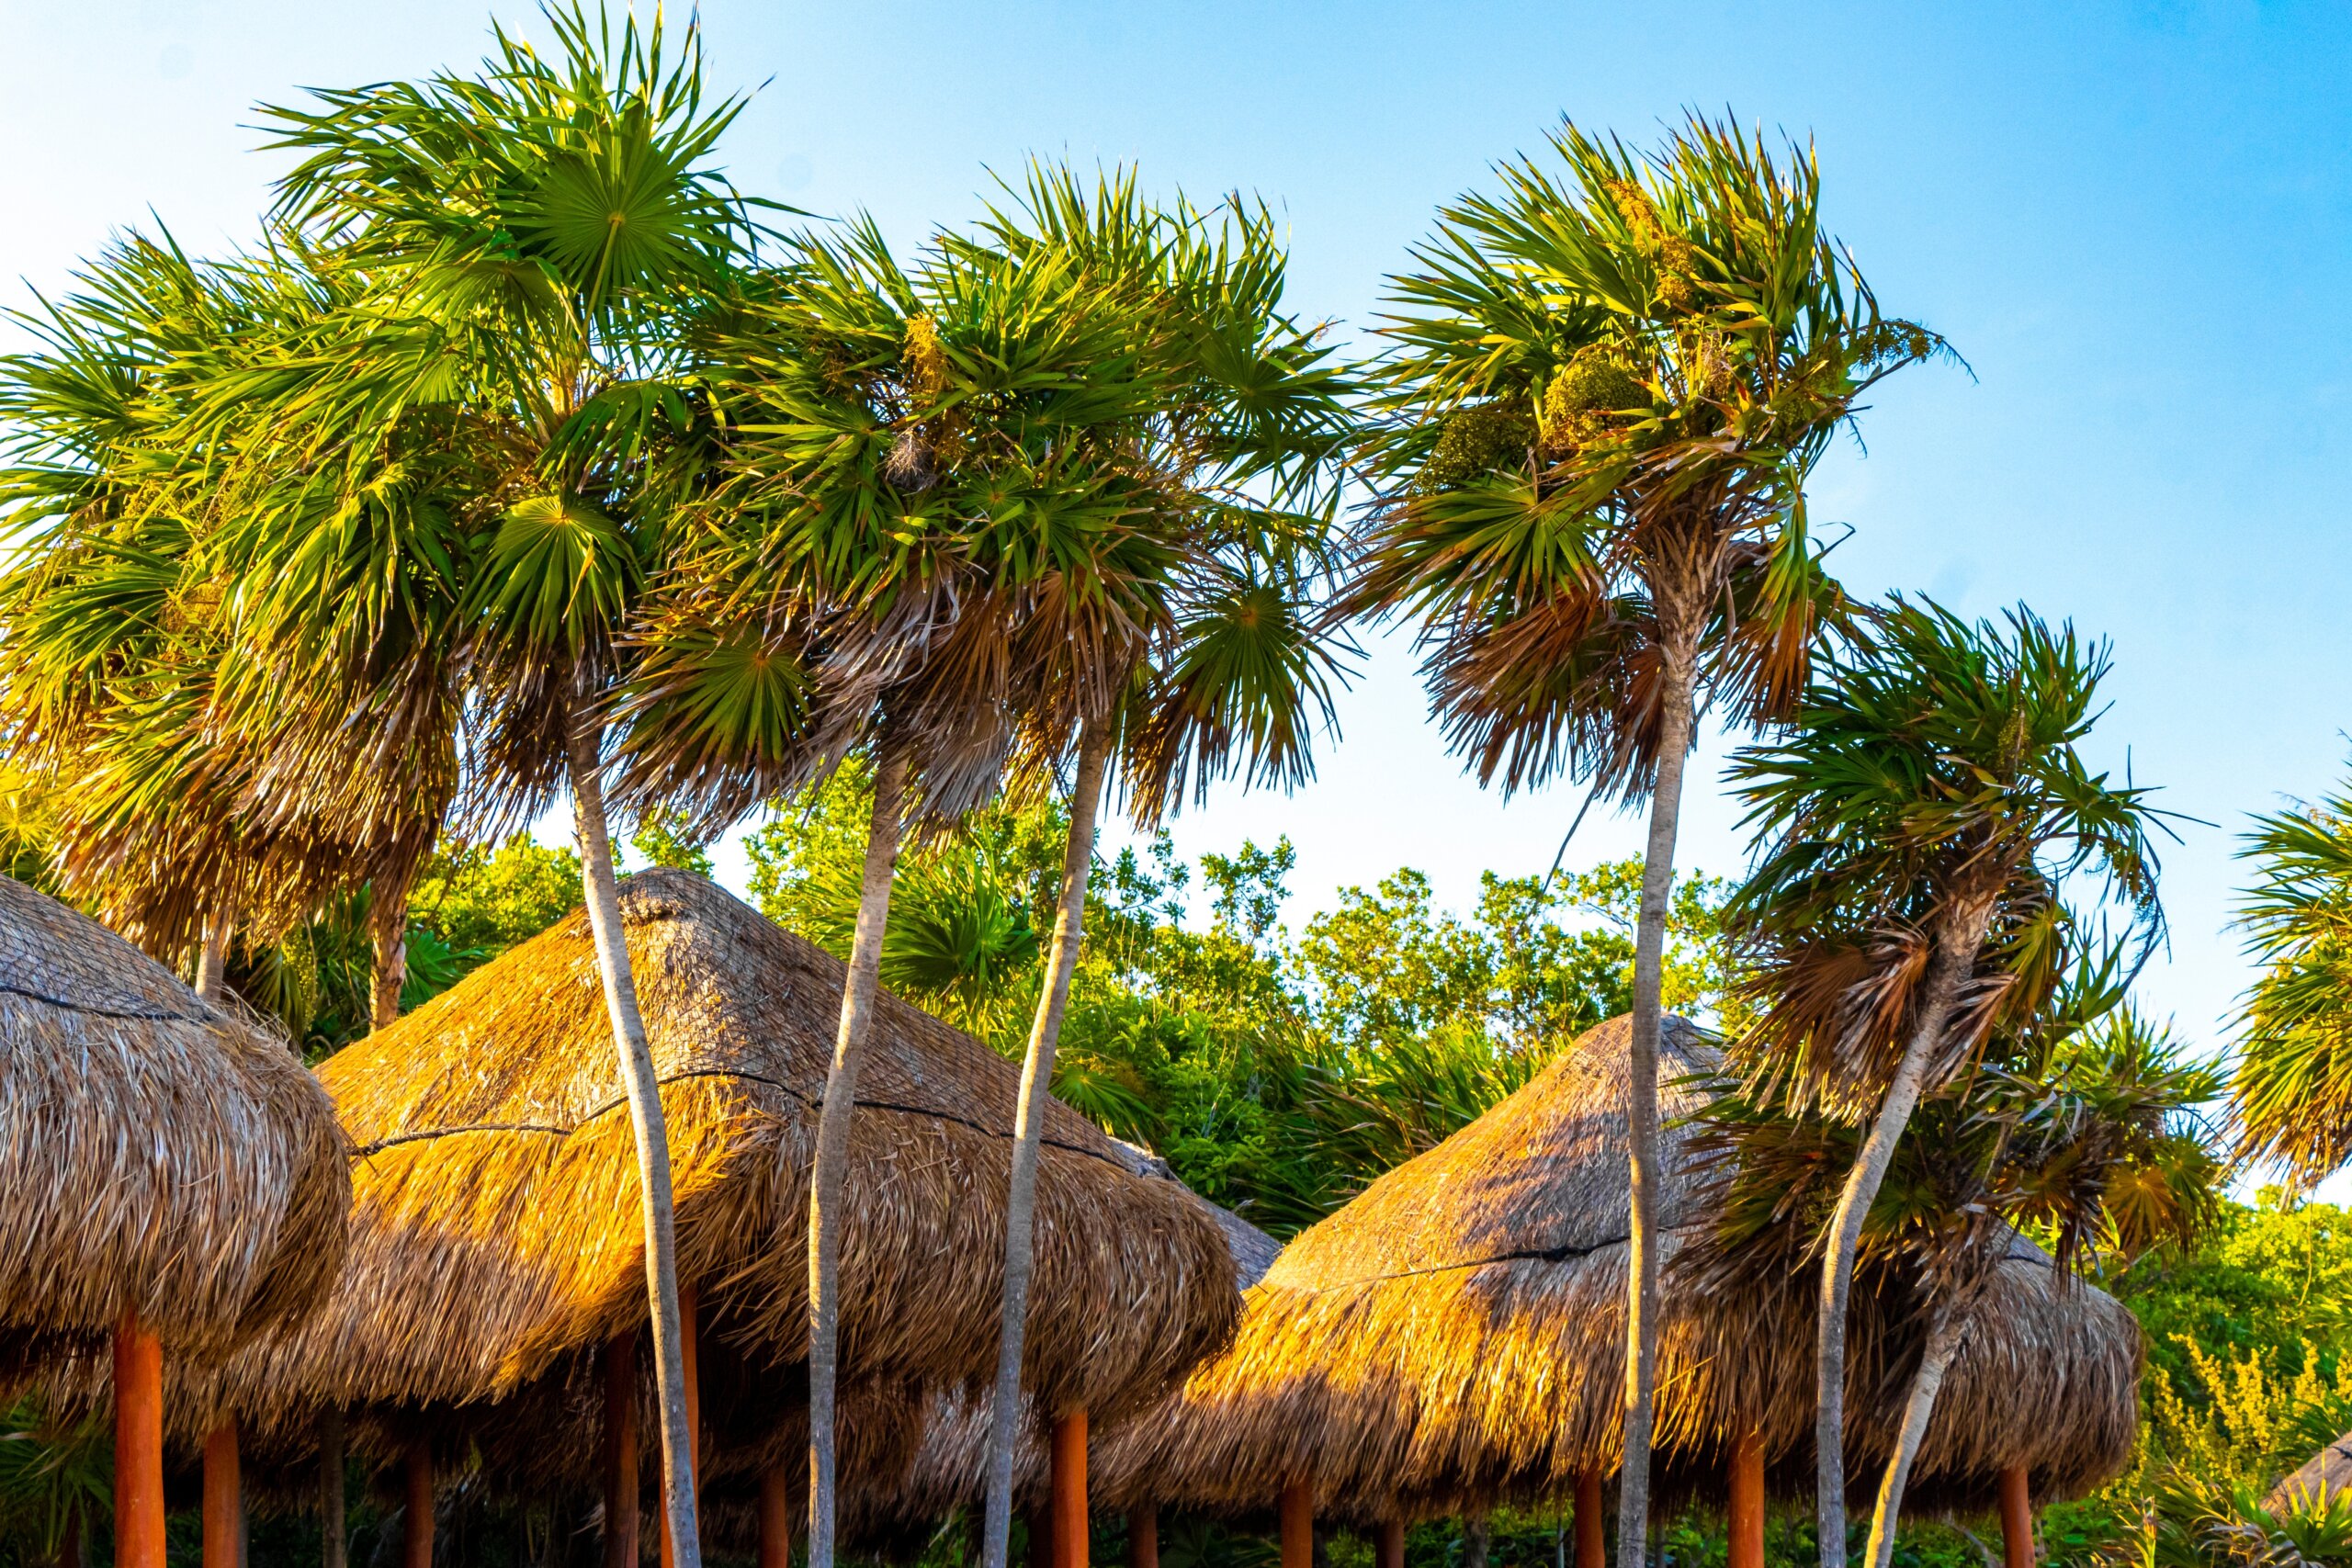 Palapa thatched roofs palm trees parasols umbrellas and sun loungers at the beach resort hotel on tropical mexican beach in Playa del Carmen Mexico.